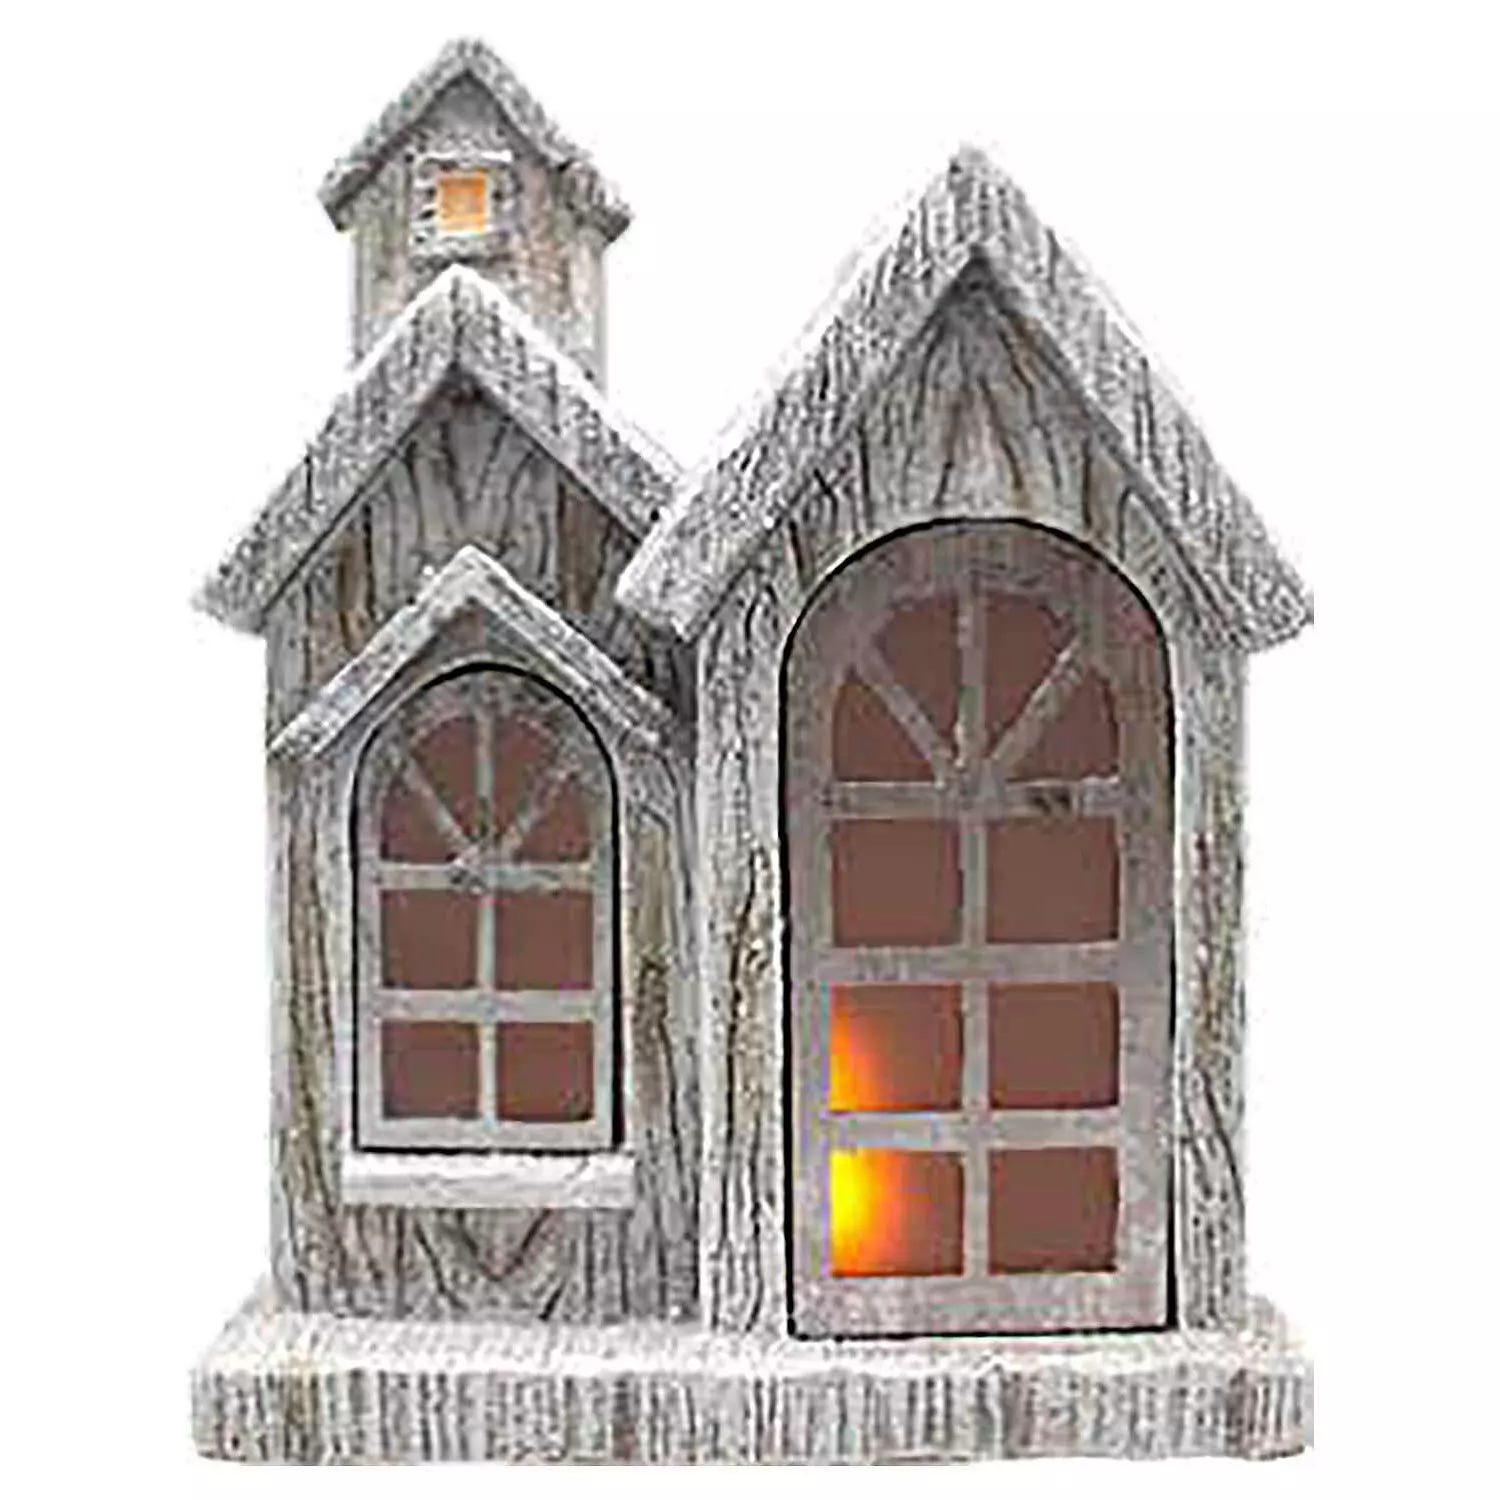 Ceramic Christmas home with LED flame, 12"